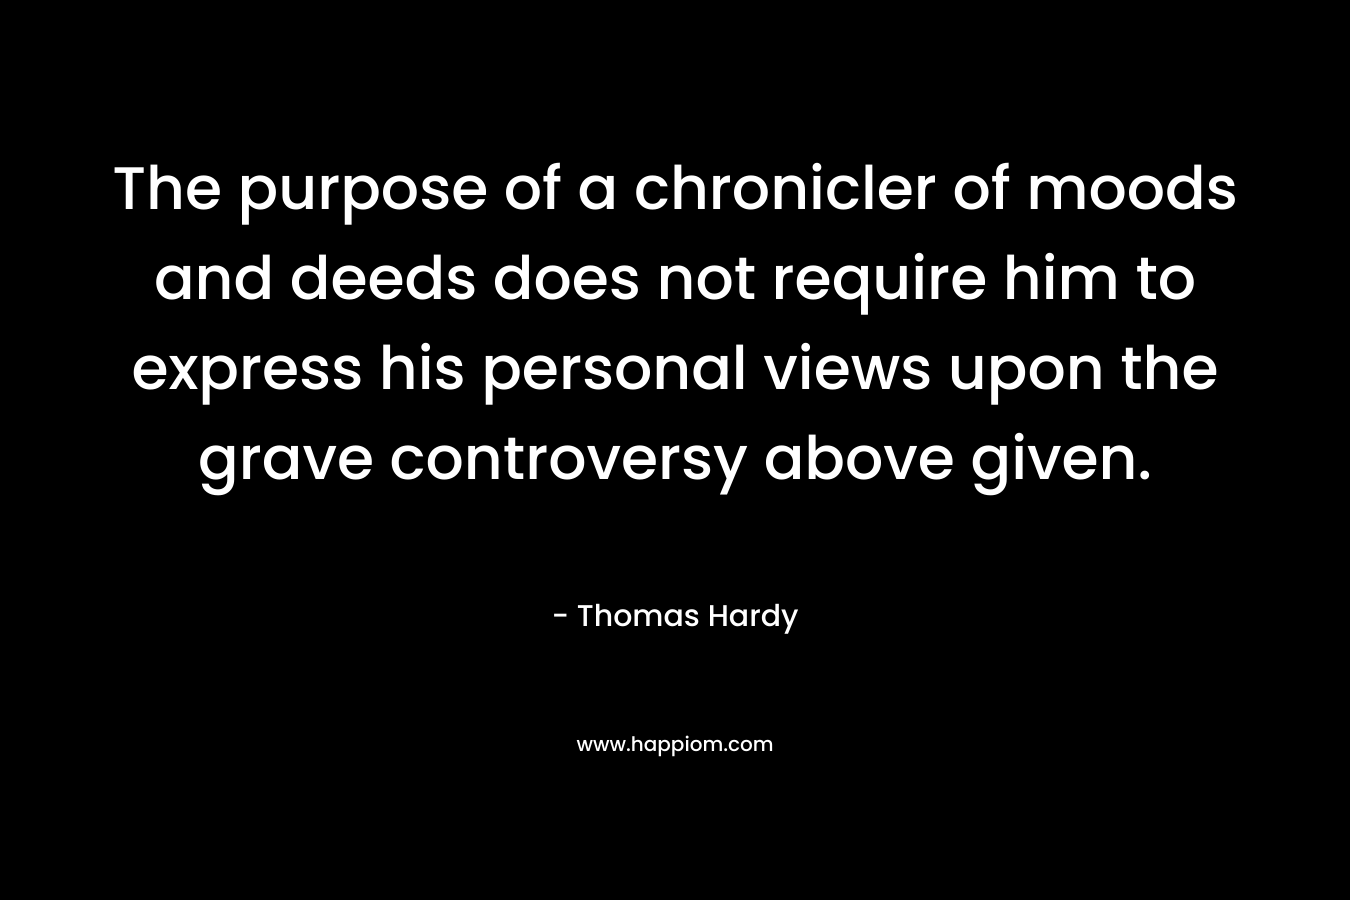 The purpose of a chronicler of moods and deeds does not require him to express his personal views upon the grave controversy above given. – Thomas Hardy